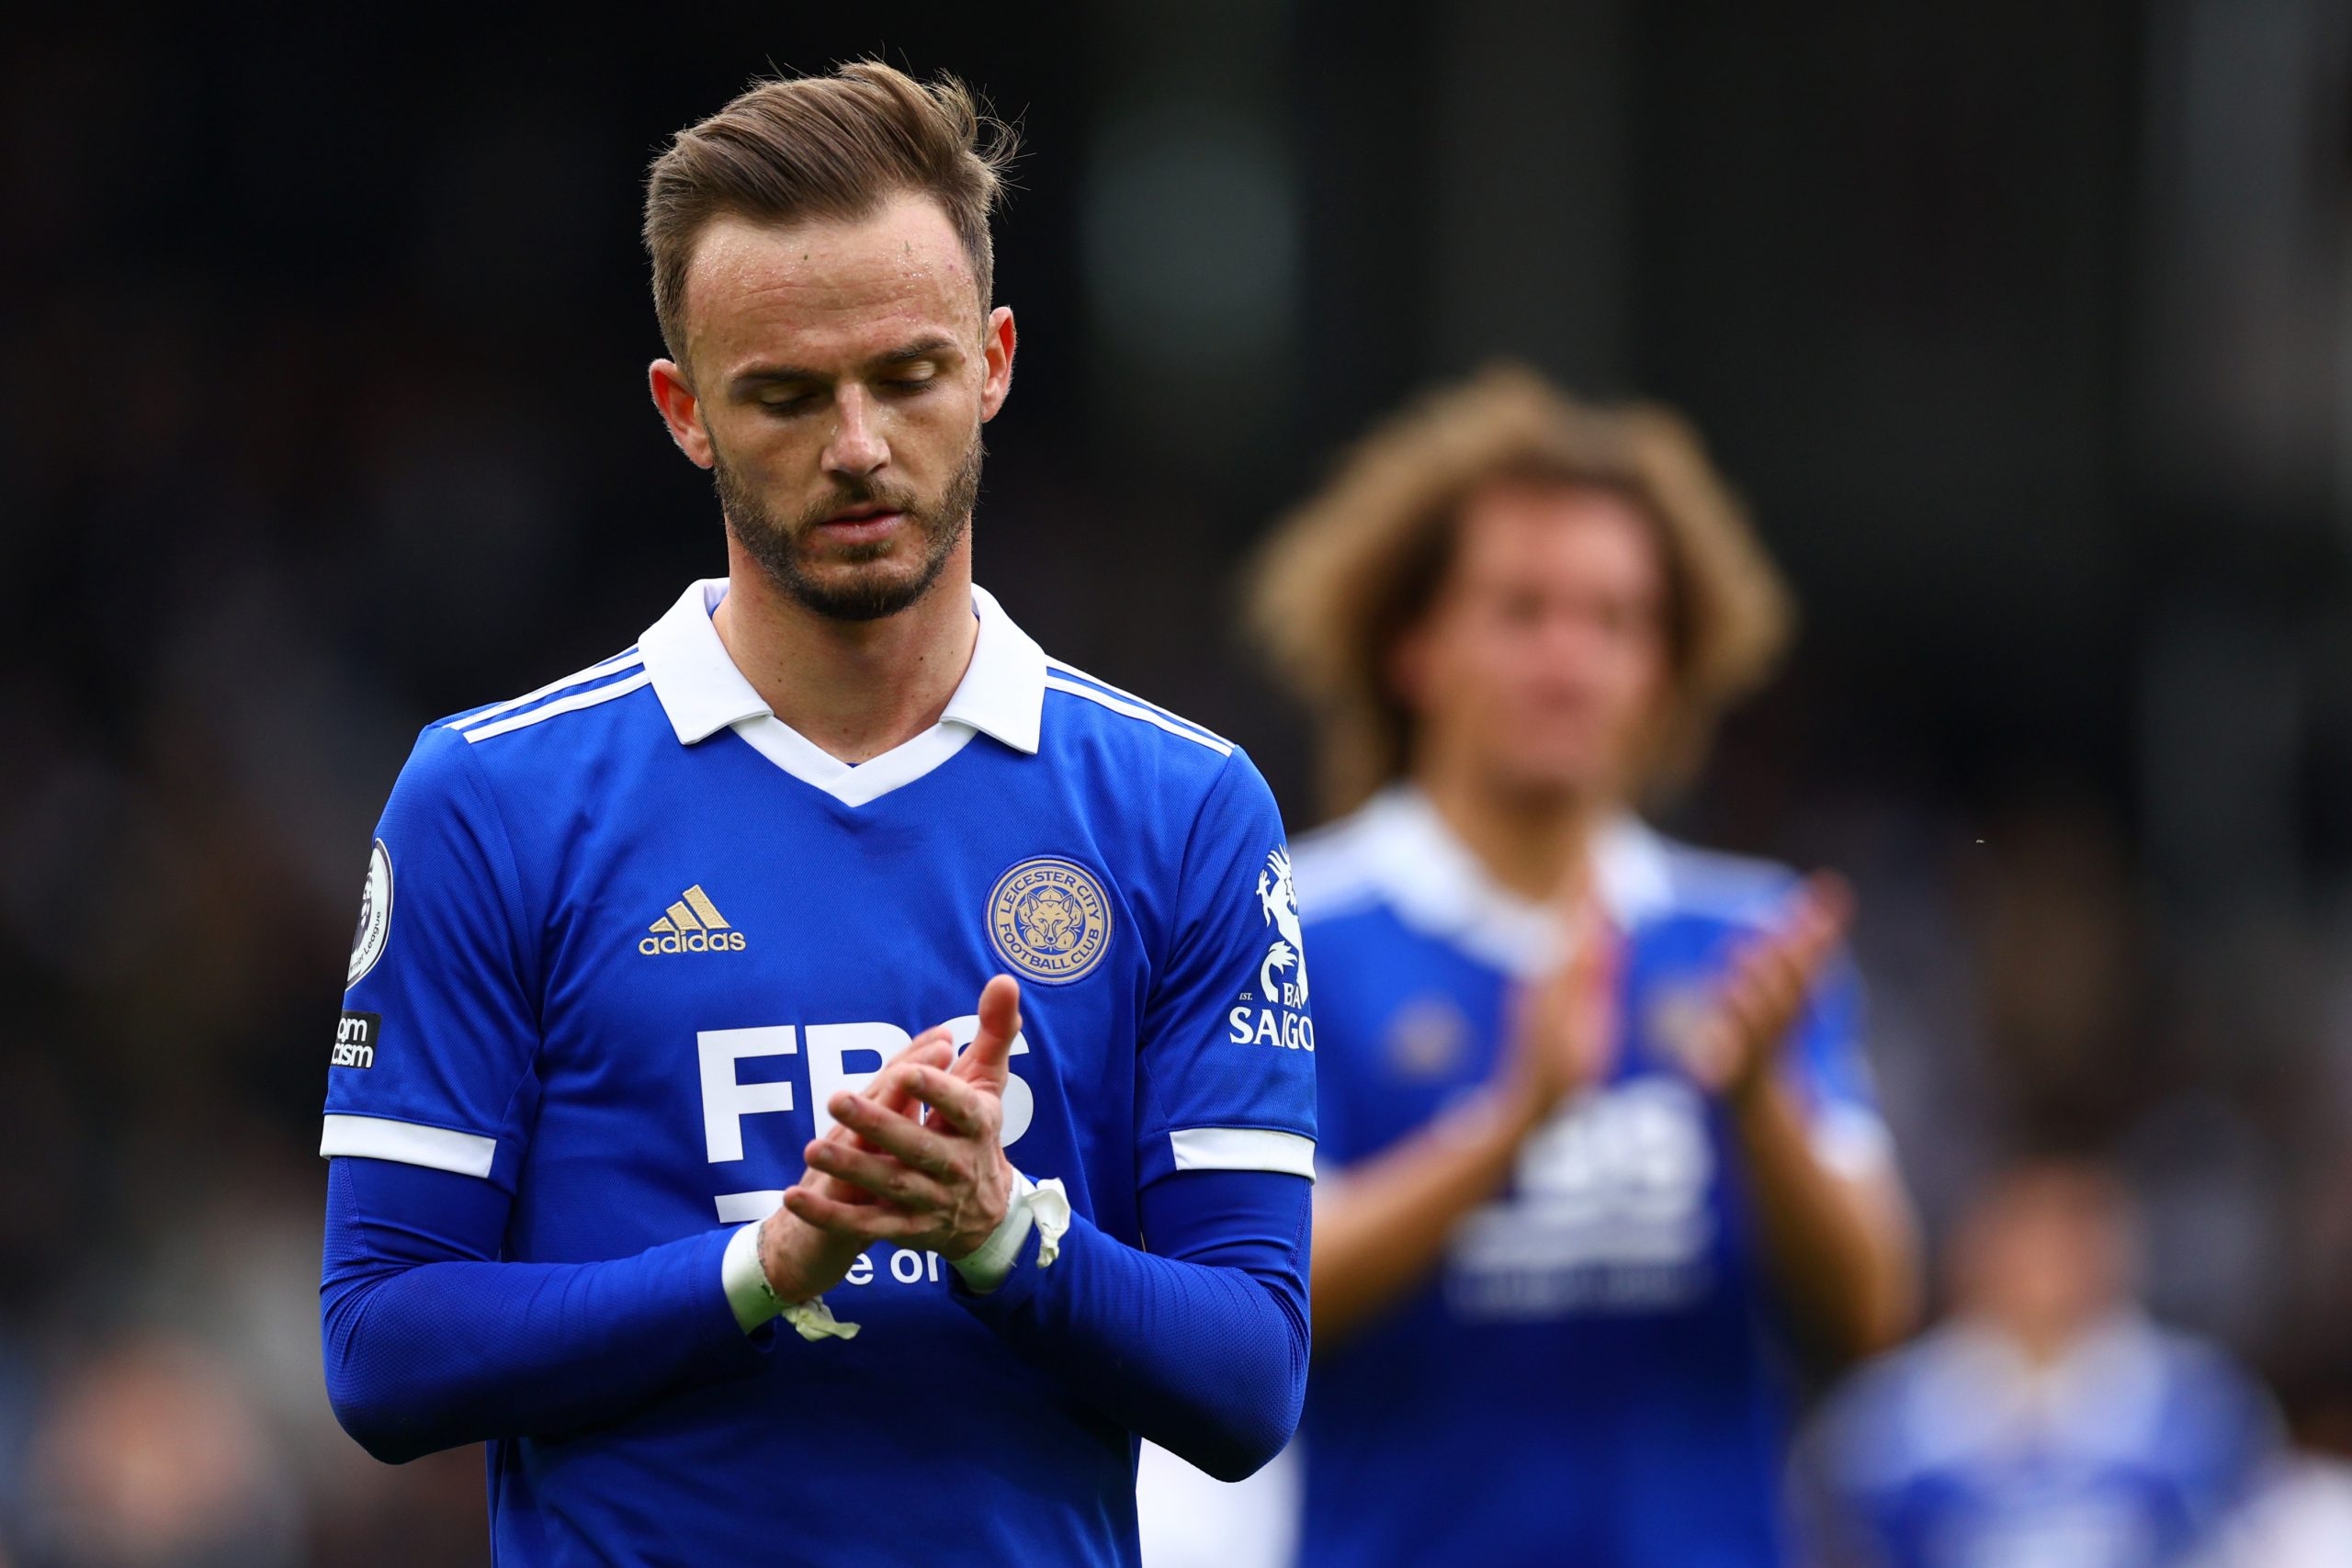 Ex-Premier League champion Leicester City’s relegation worries deepen after 5-3 loss at Fulham